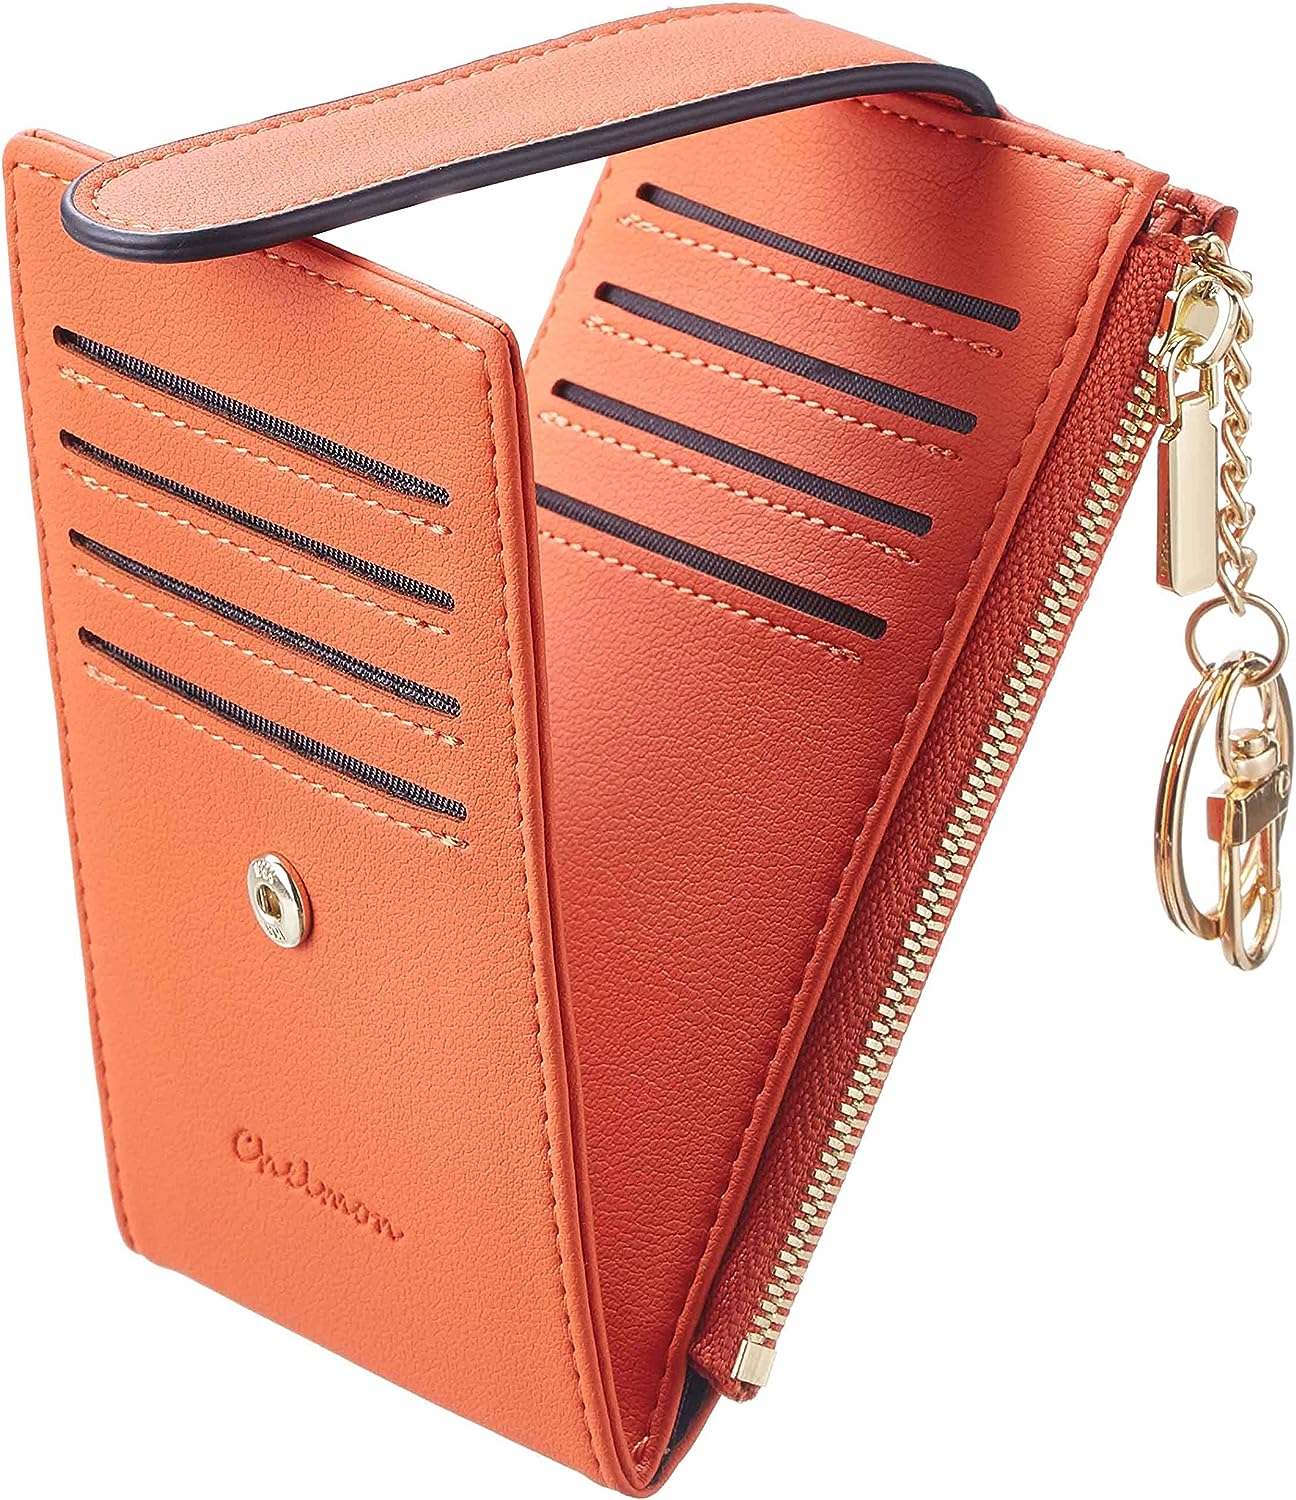 chelmon womens wallet top 15 christmas gifts for female coworkers